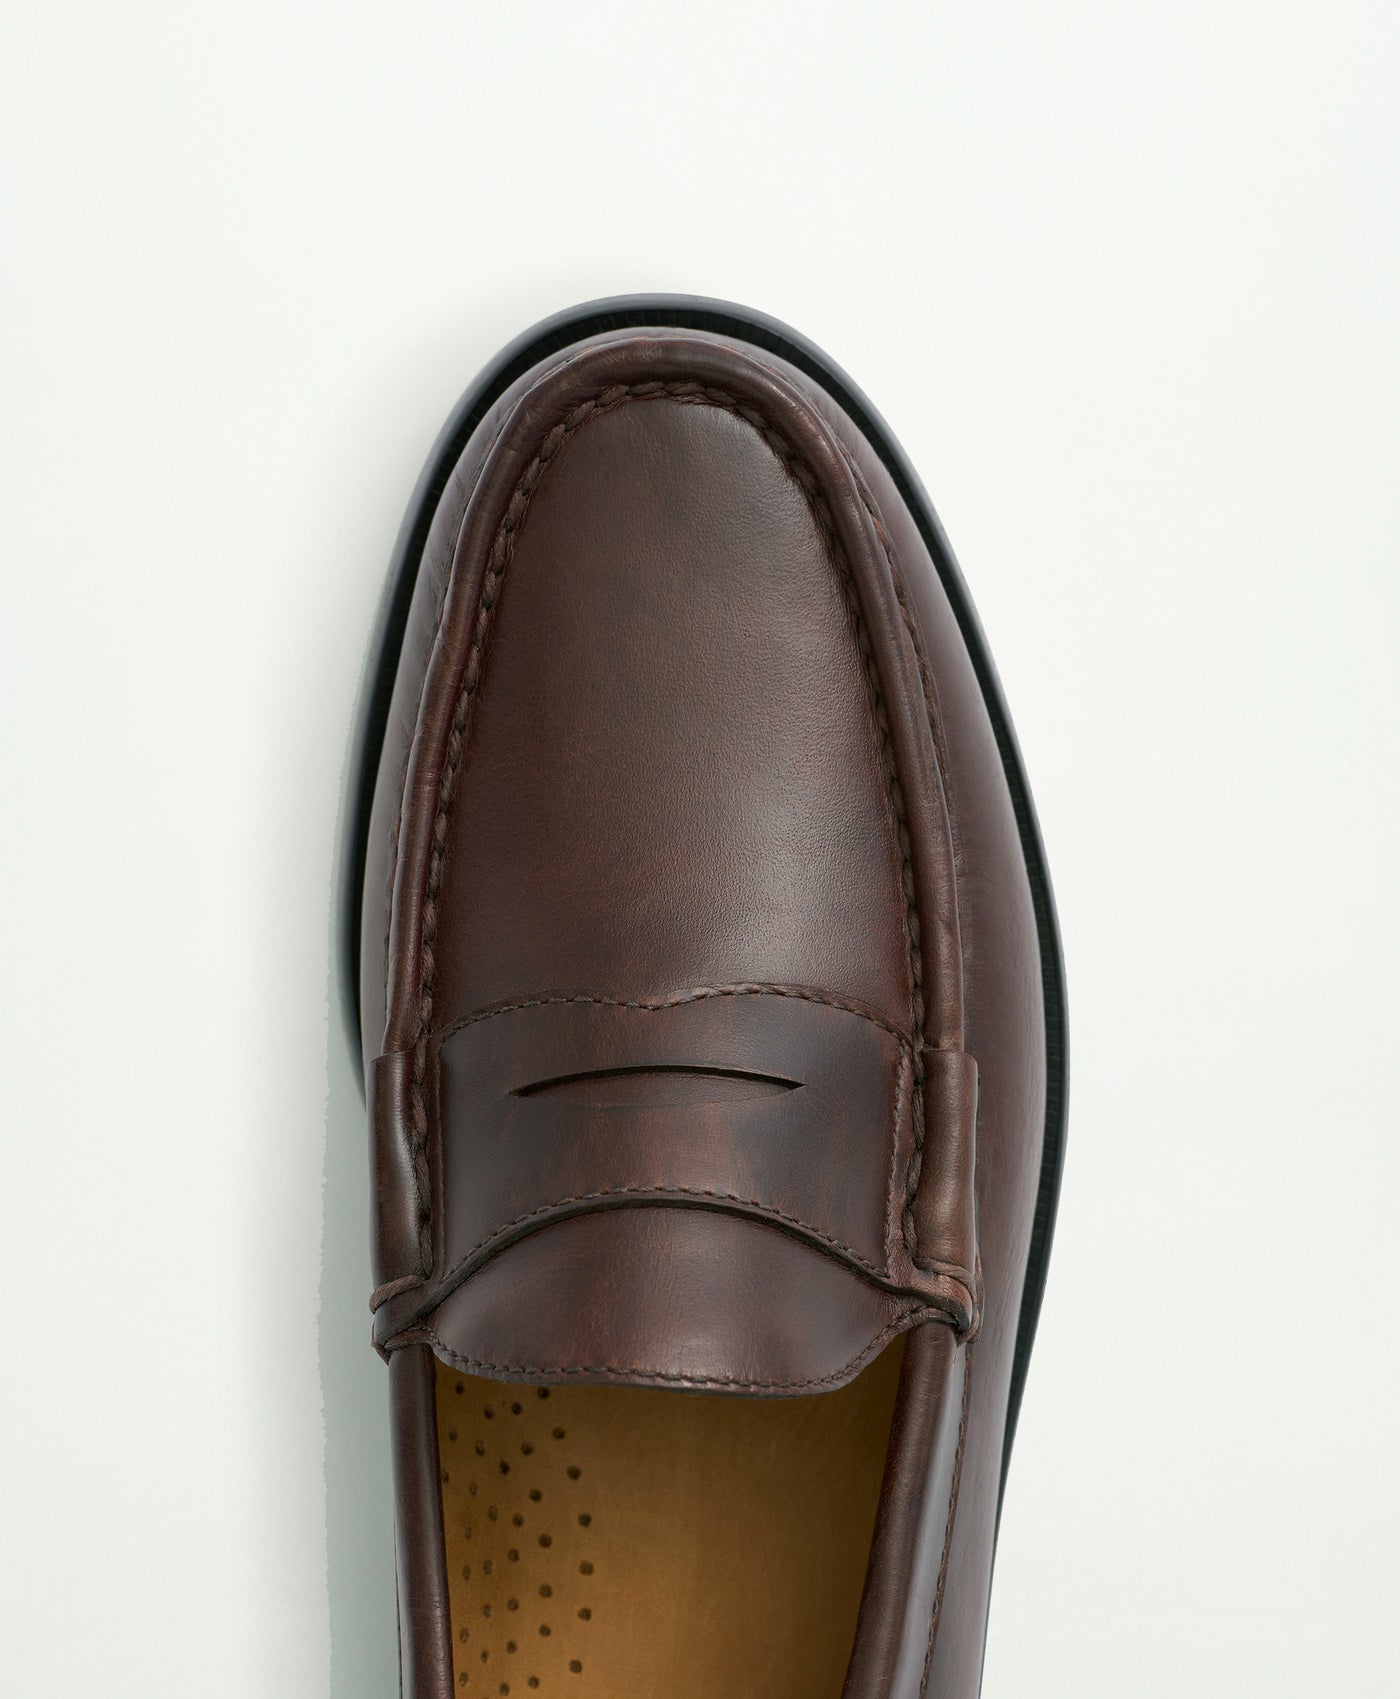 Westport Penny Loafers - Brooks Brothers Canada